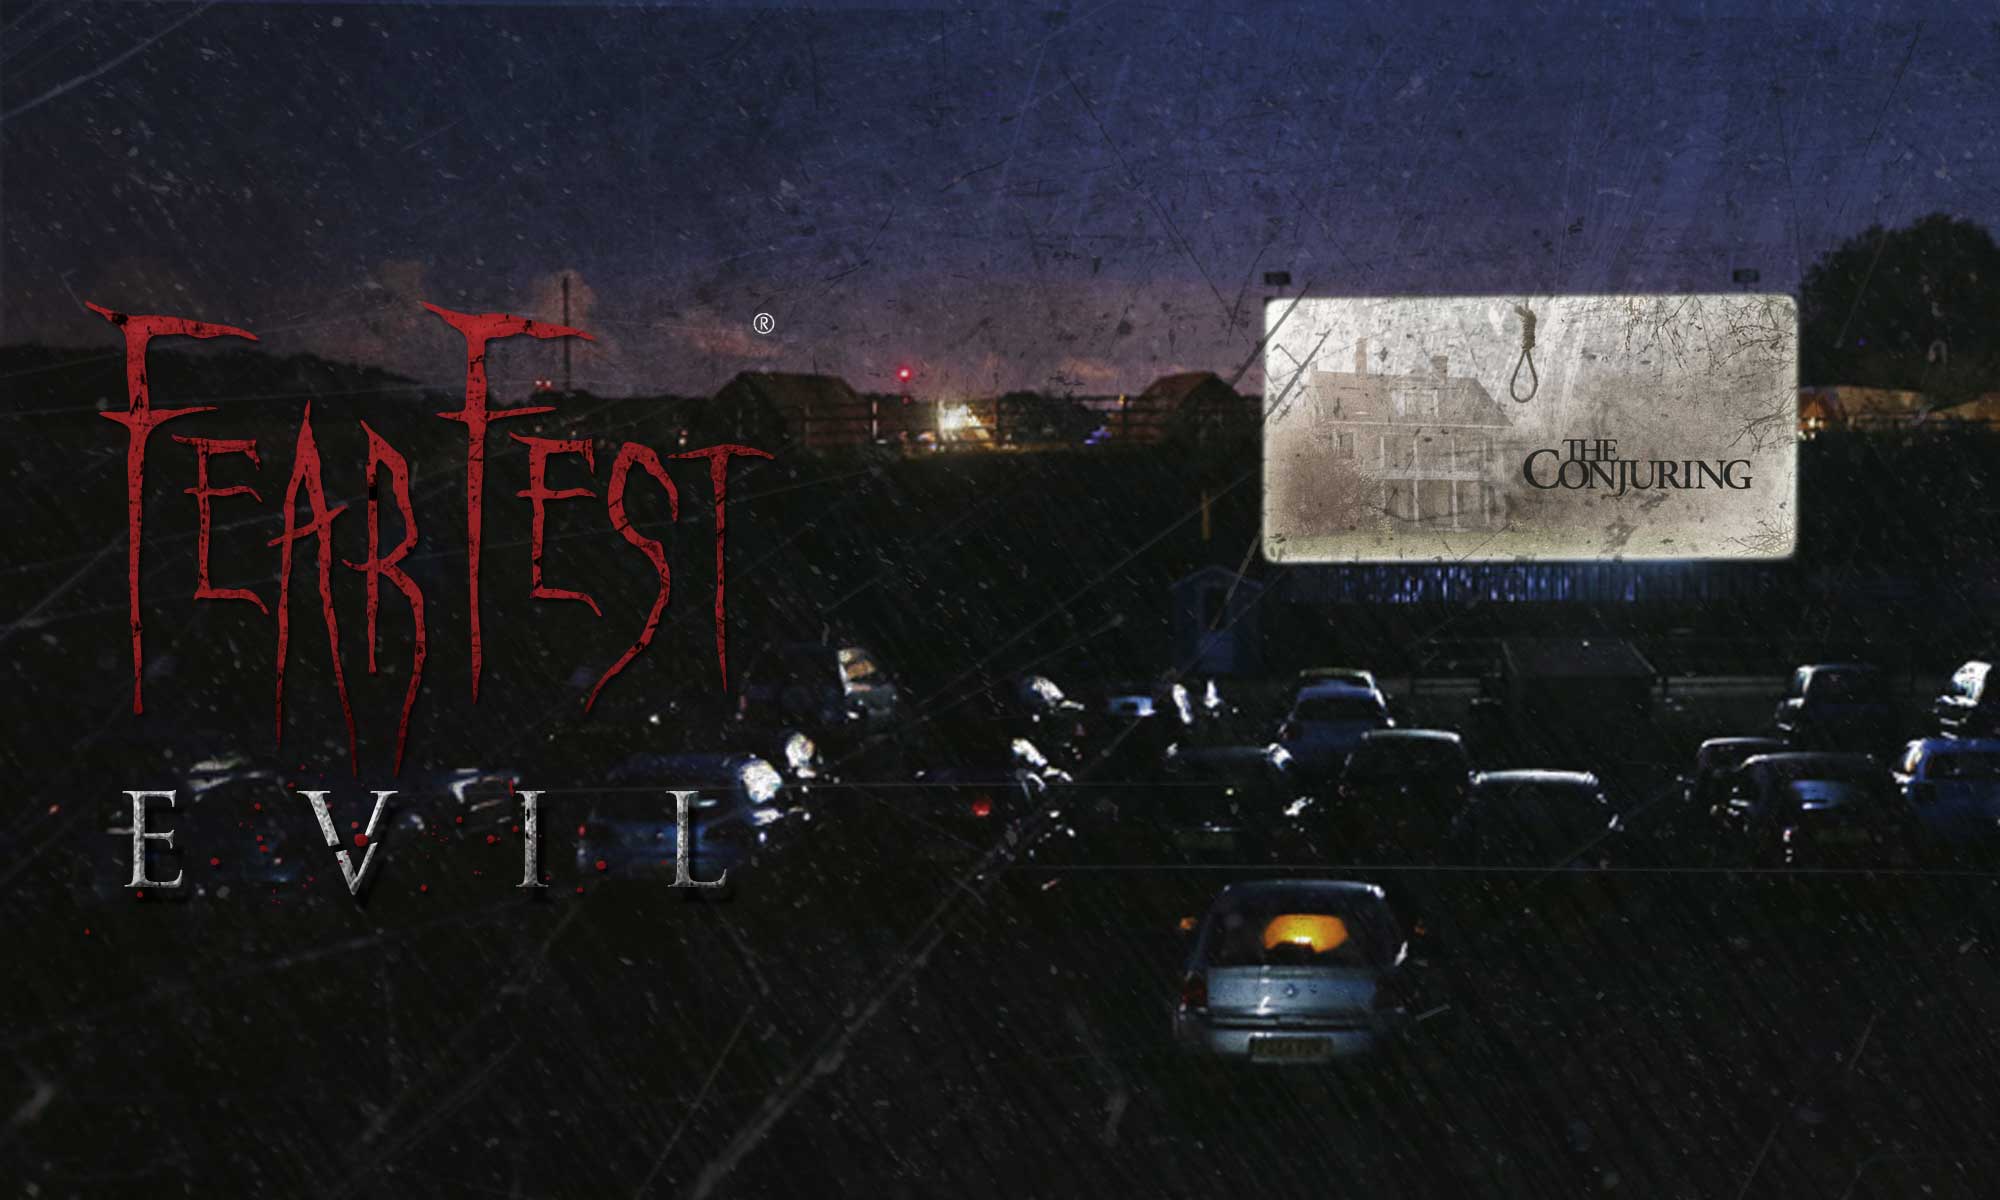 The Conjuring Free Drive-In Cinema Screening at FearFest-Evil September 2019